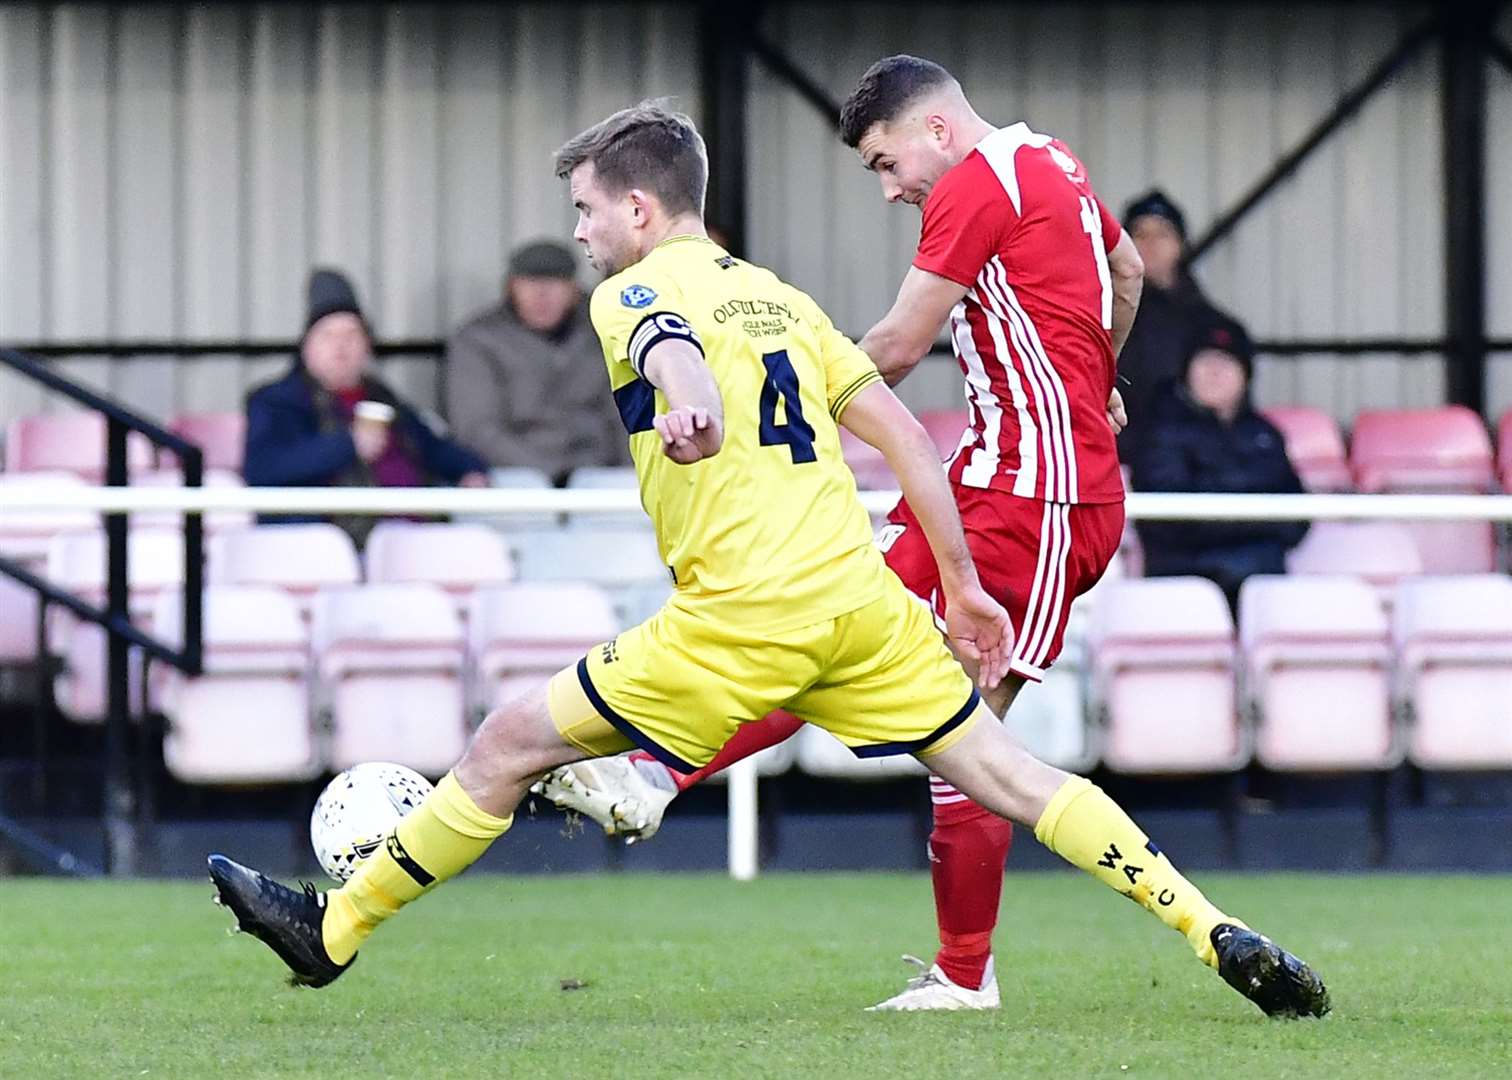 Wick Academy skipper Alan Farquhar launches himself at full stretch to thwart Formartine's Scott Lisle. The Scorries would go on to win 2-1 – their first victory since November 2. Picture: Mel Roger